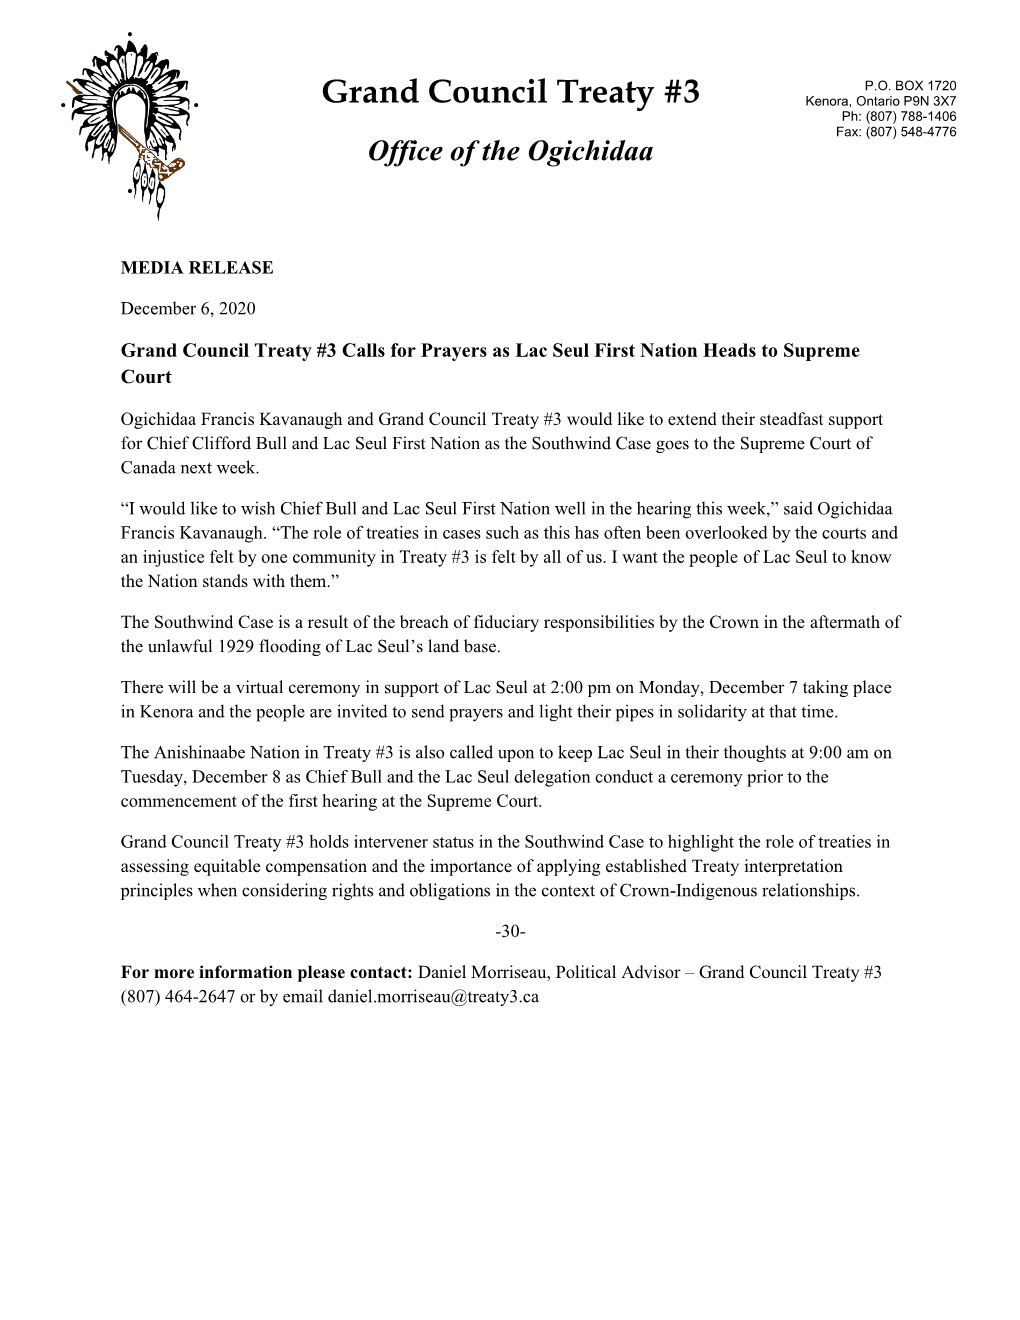 Grand Council Treaty #3 Calls for Prayers As Lac Seul First Nation Heads to Supreme Court